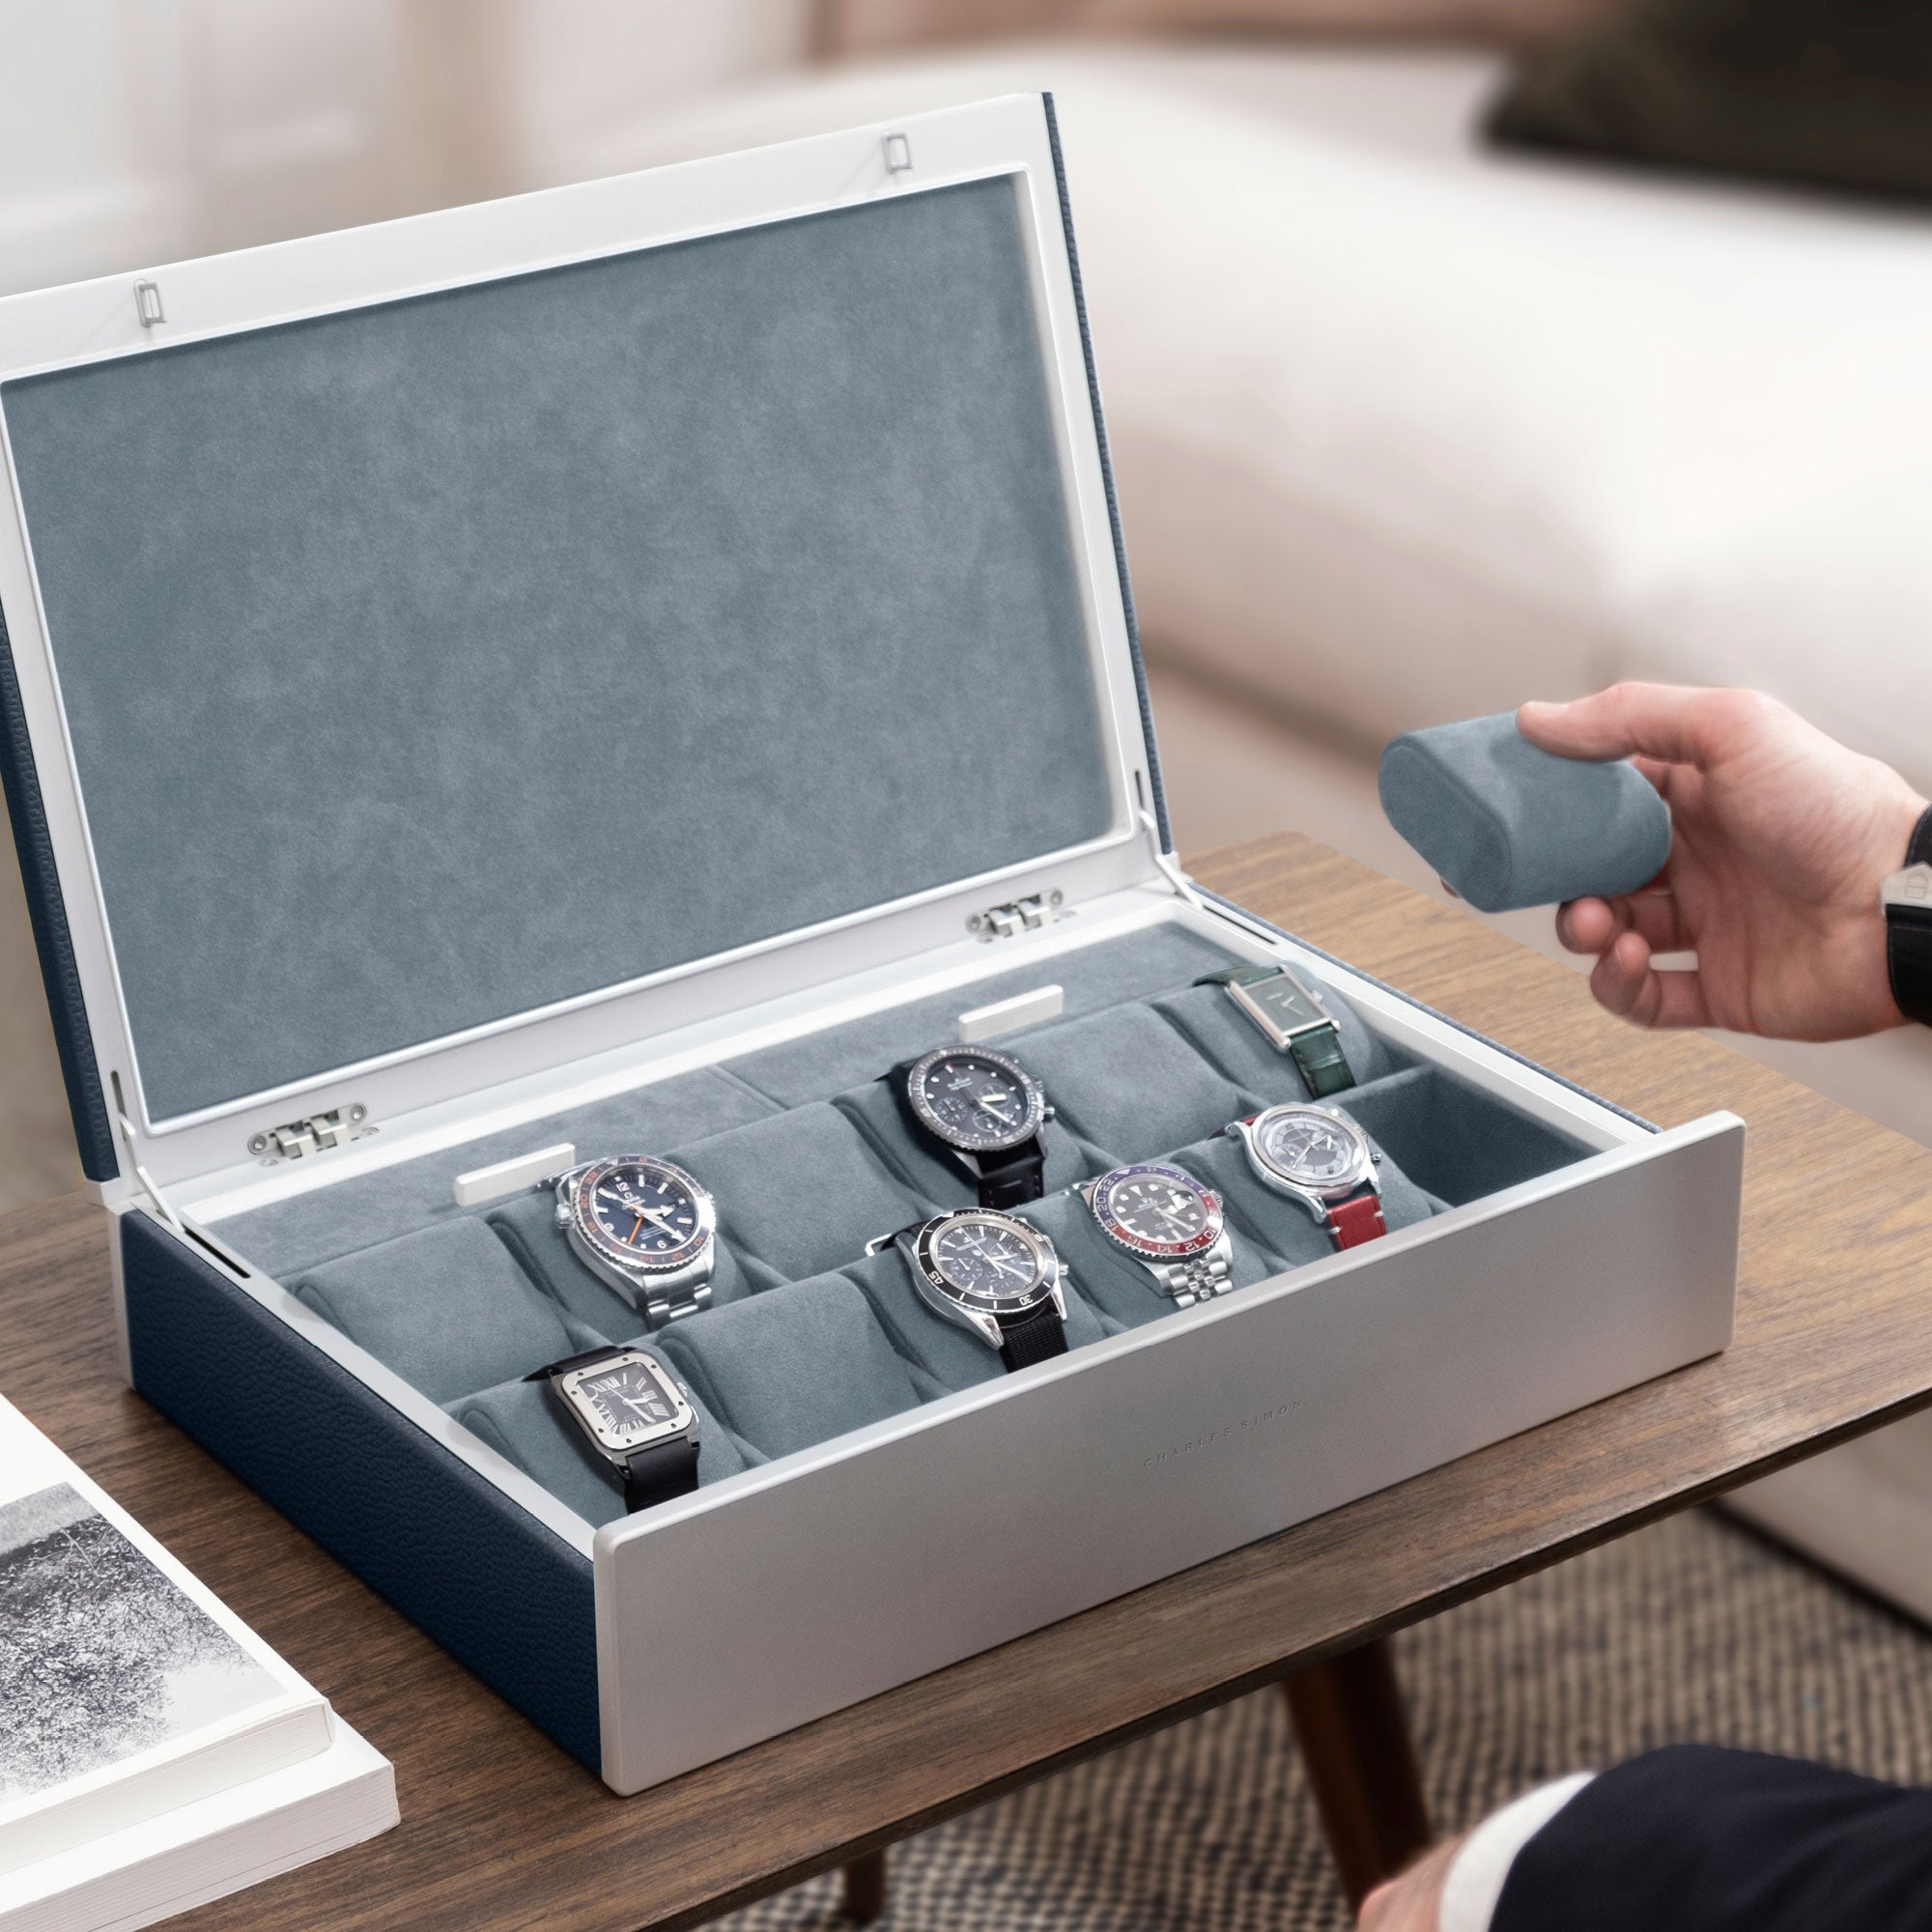 Lifestyle photo of man opening marine leather Spence 12 Watch box with luxury watch collection displayed inside